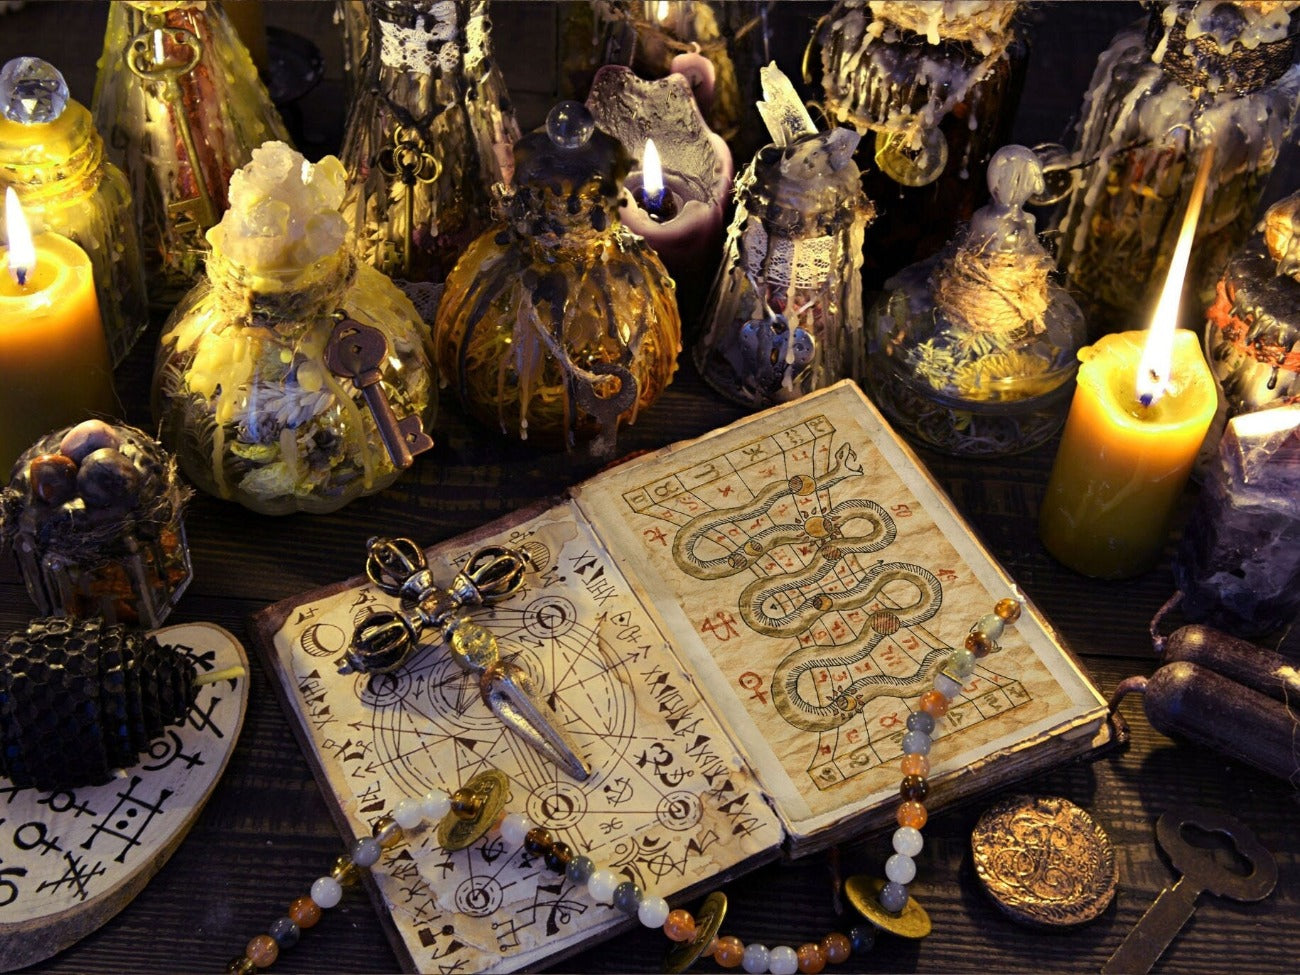 ALCHEMY JOURNAL 50 pages, Alchemy Science Occult Book, Hermetic Grimoire, Wicca Alchemical Manuscript, Devilish Witchcraft Illustrations - Morgana Magick Spell